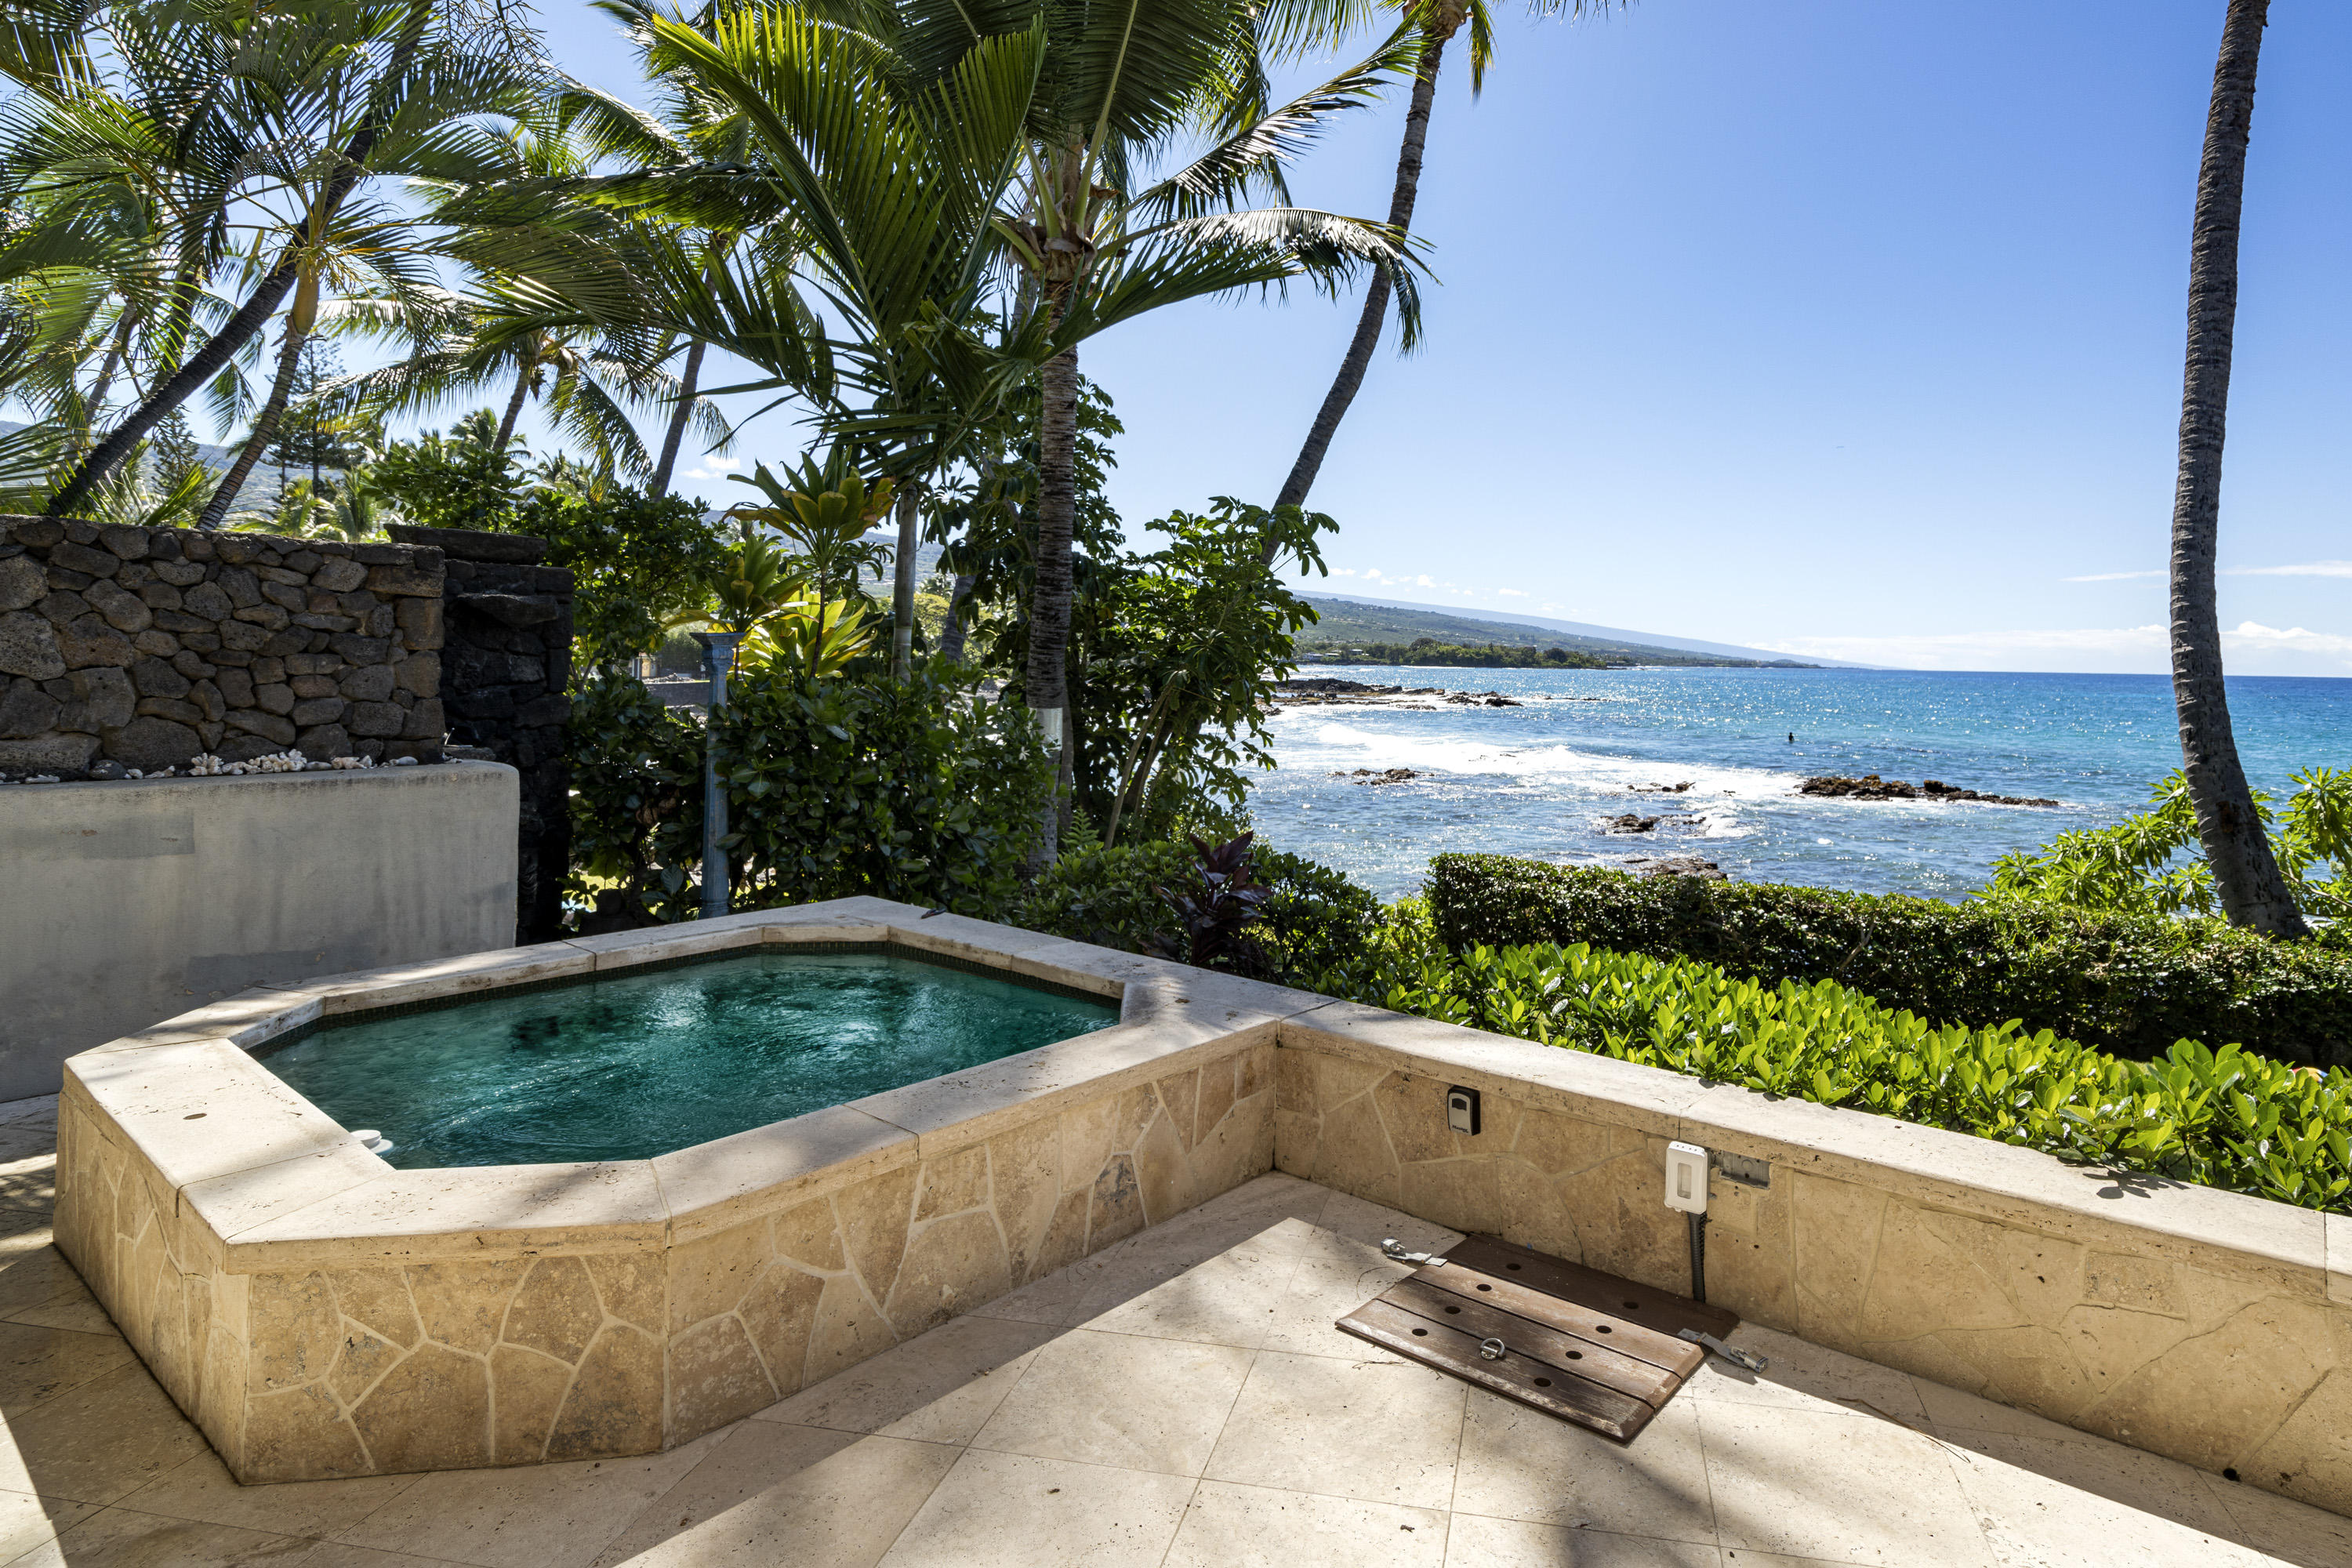 Heaven on earth with this private Ocean View Hot Tub